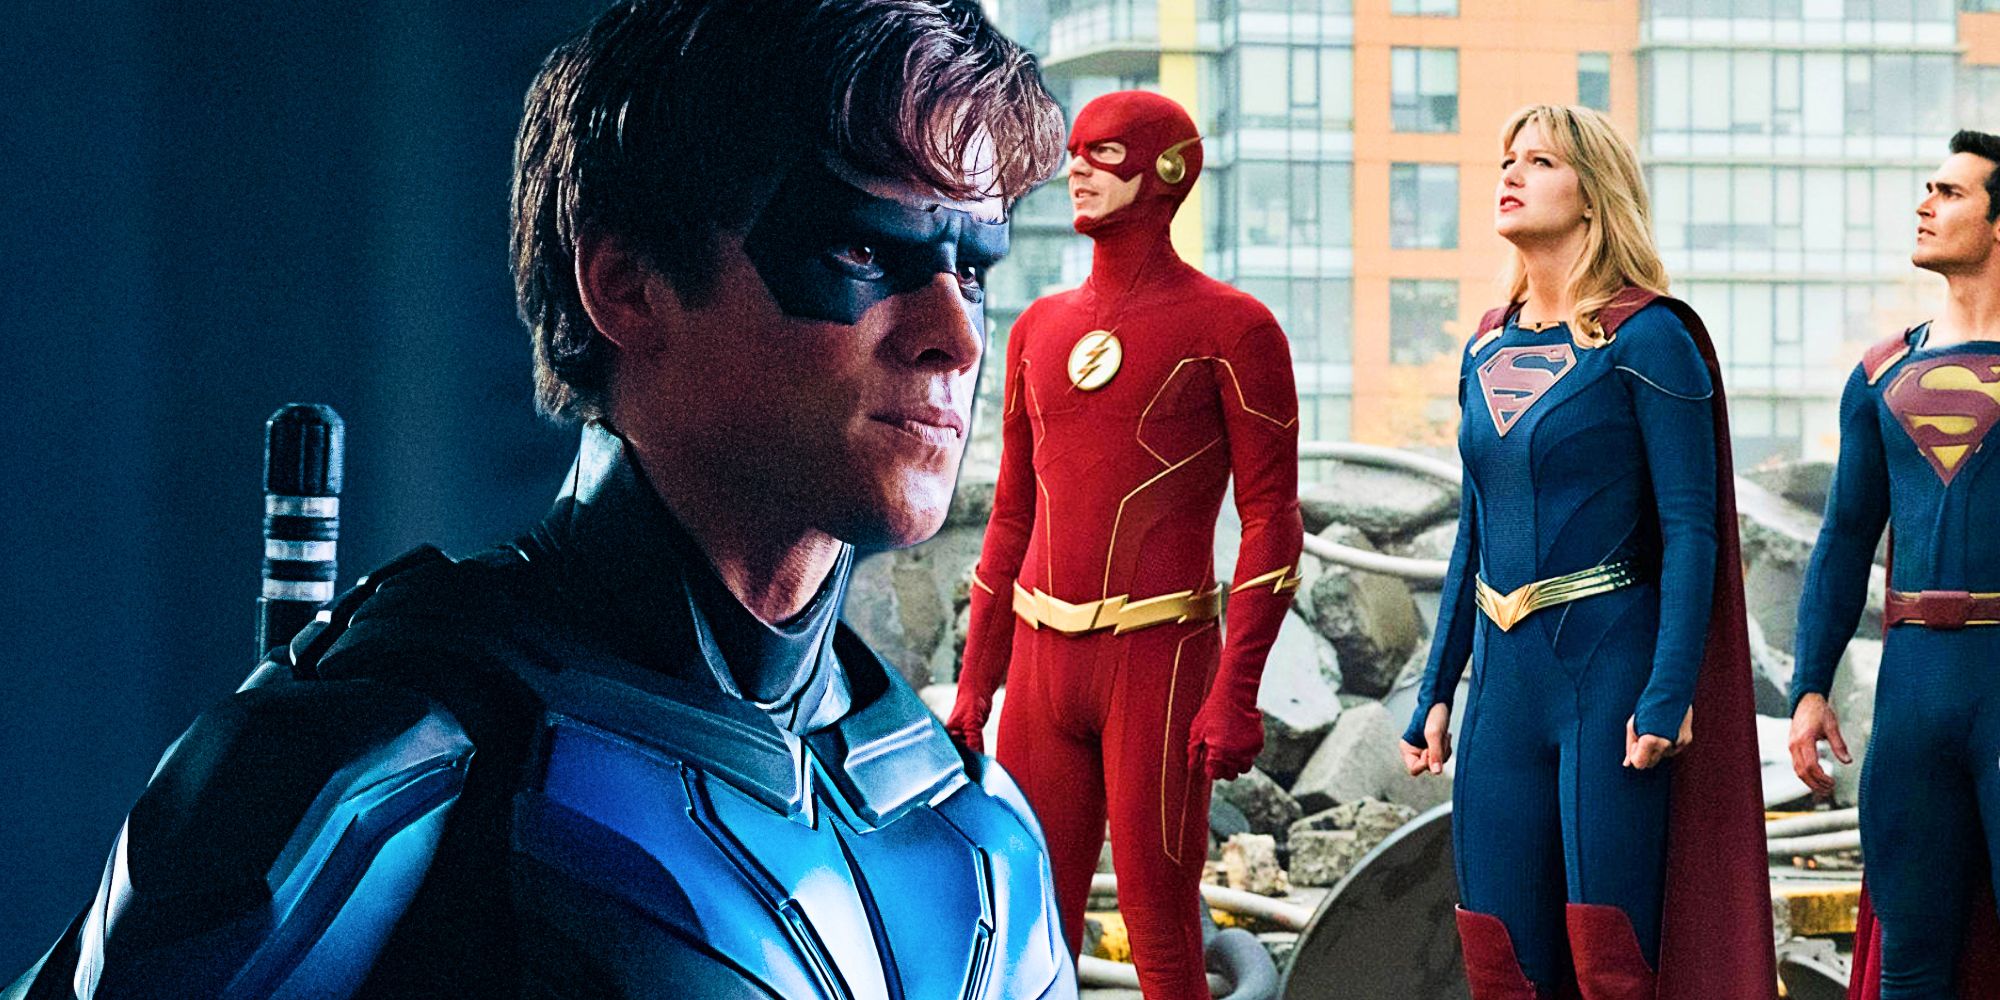 Titans' Rejected Arrowverse Cameo Was Right (Crisis Didn't Need It)